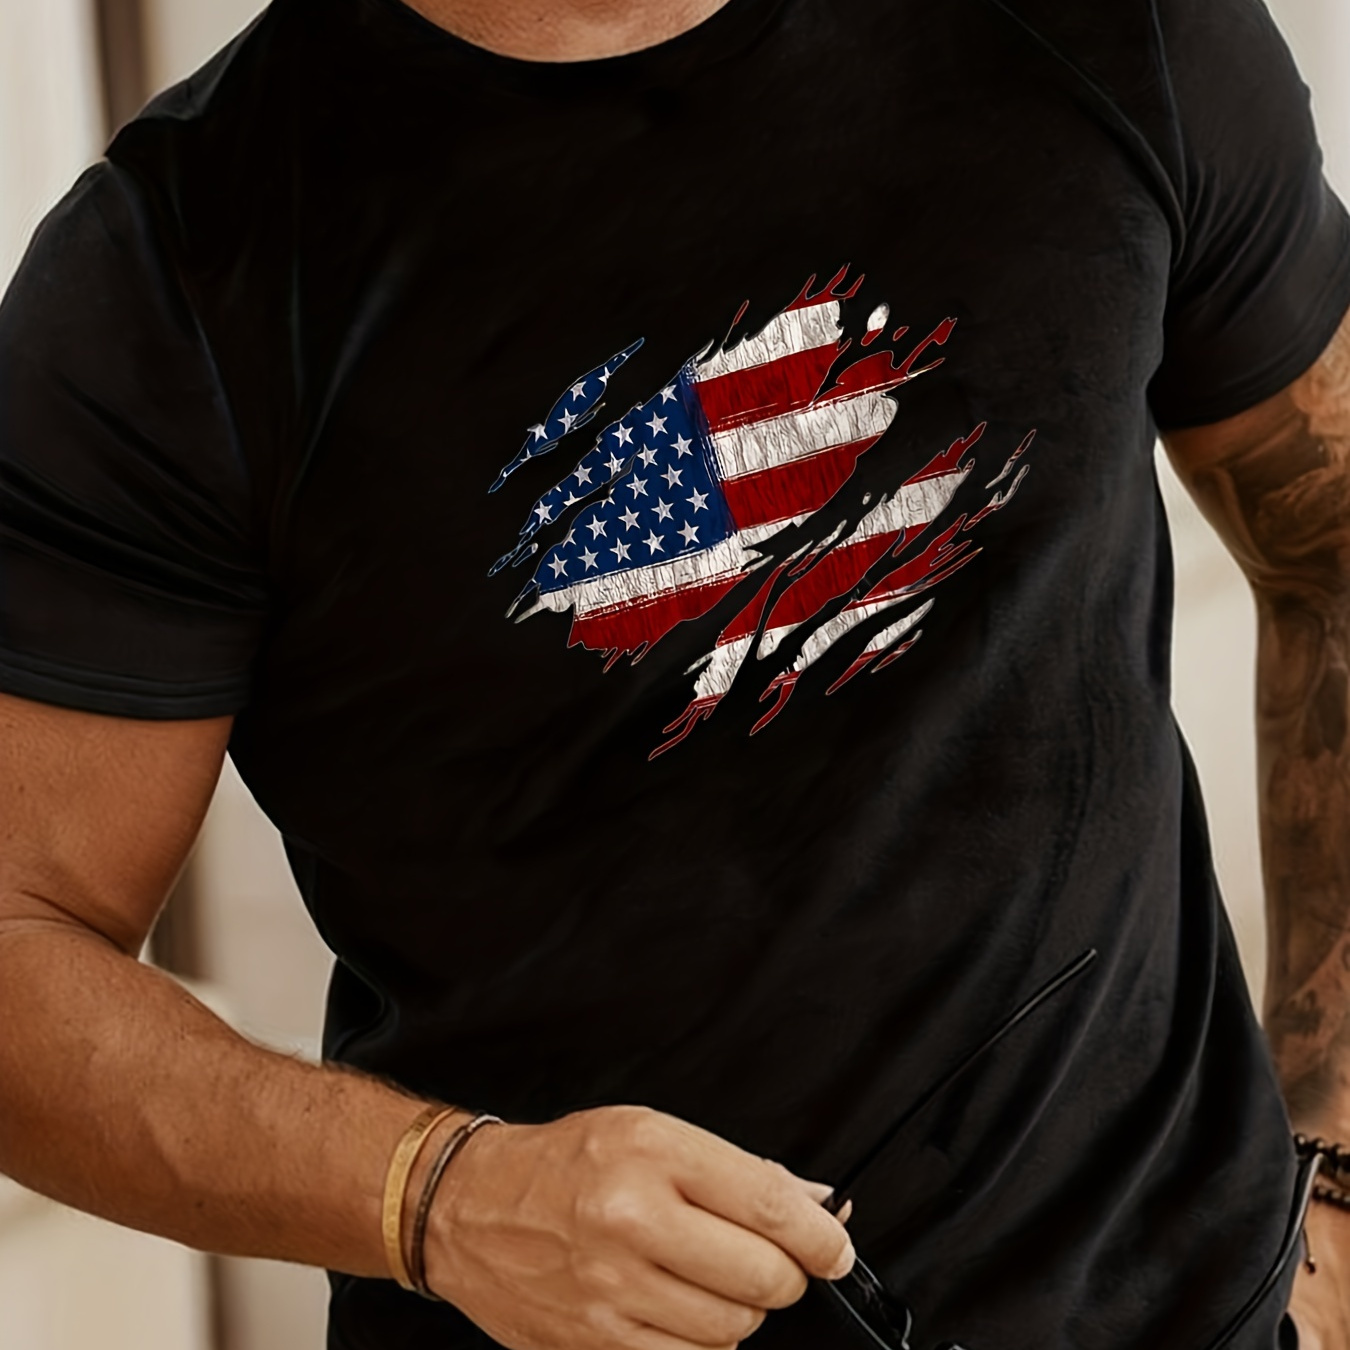 

Trendy American Flag Pattern Print Men's Comfy Chic T-shirt, Graphic Tee Men's Summer Outdoor Clothes, Men's Clothing, Tops For Men, Gift For Men